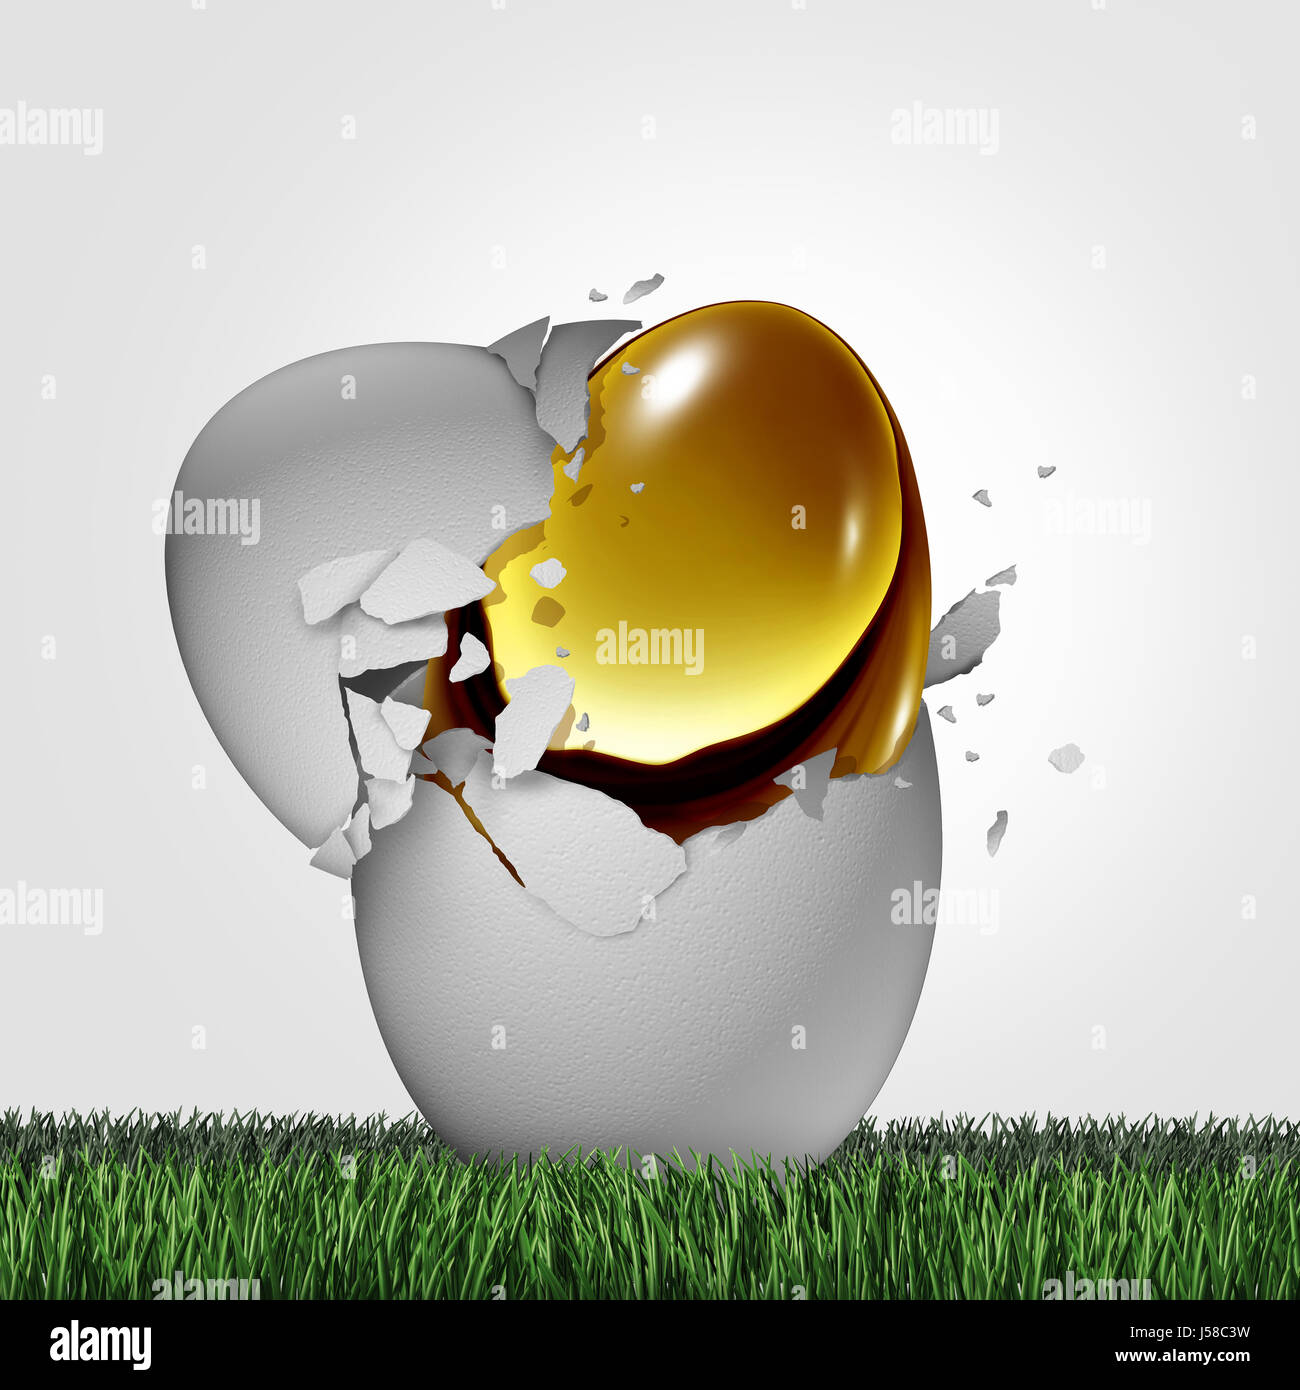 Wealth potential financial concept as a golden egg emerging out of an ordinary one as a business success metaphor. Stock Photo